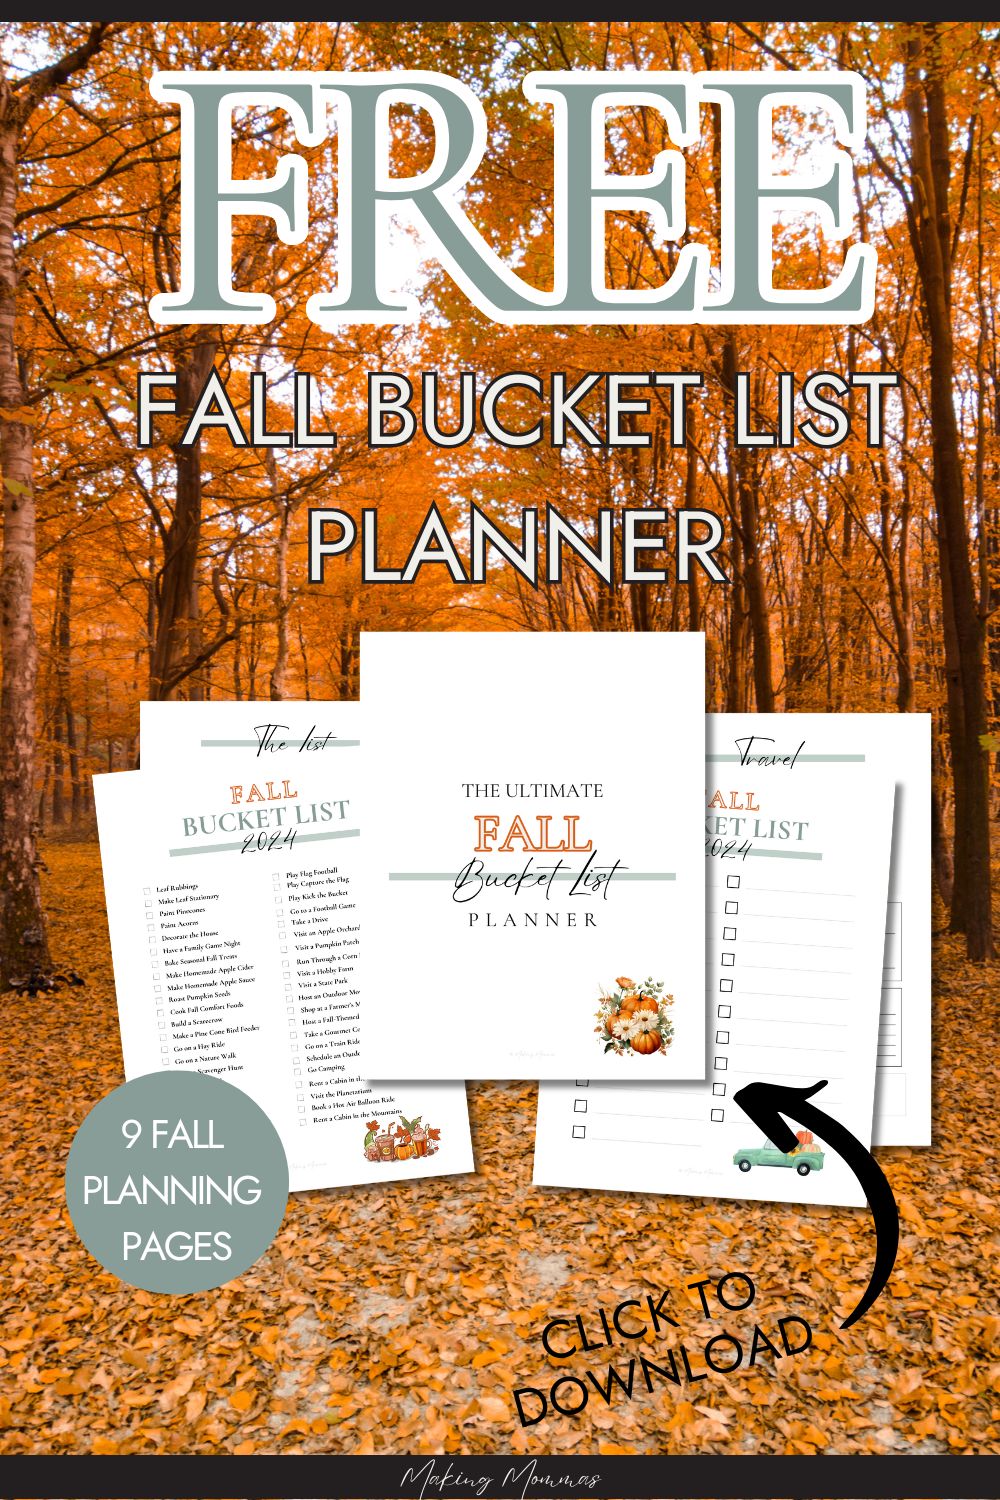 Pin image reading, "Free Fall Bucket List Planner." with an image of fall trees and leaves.